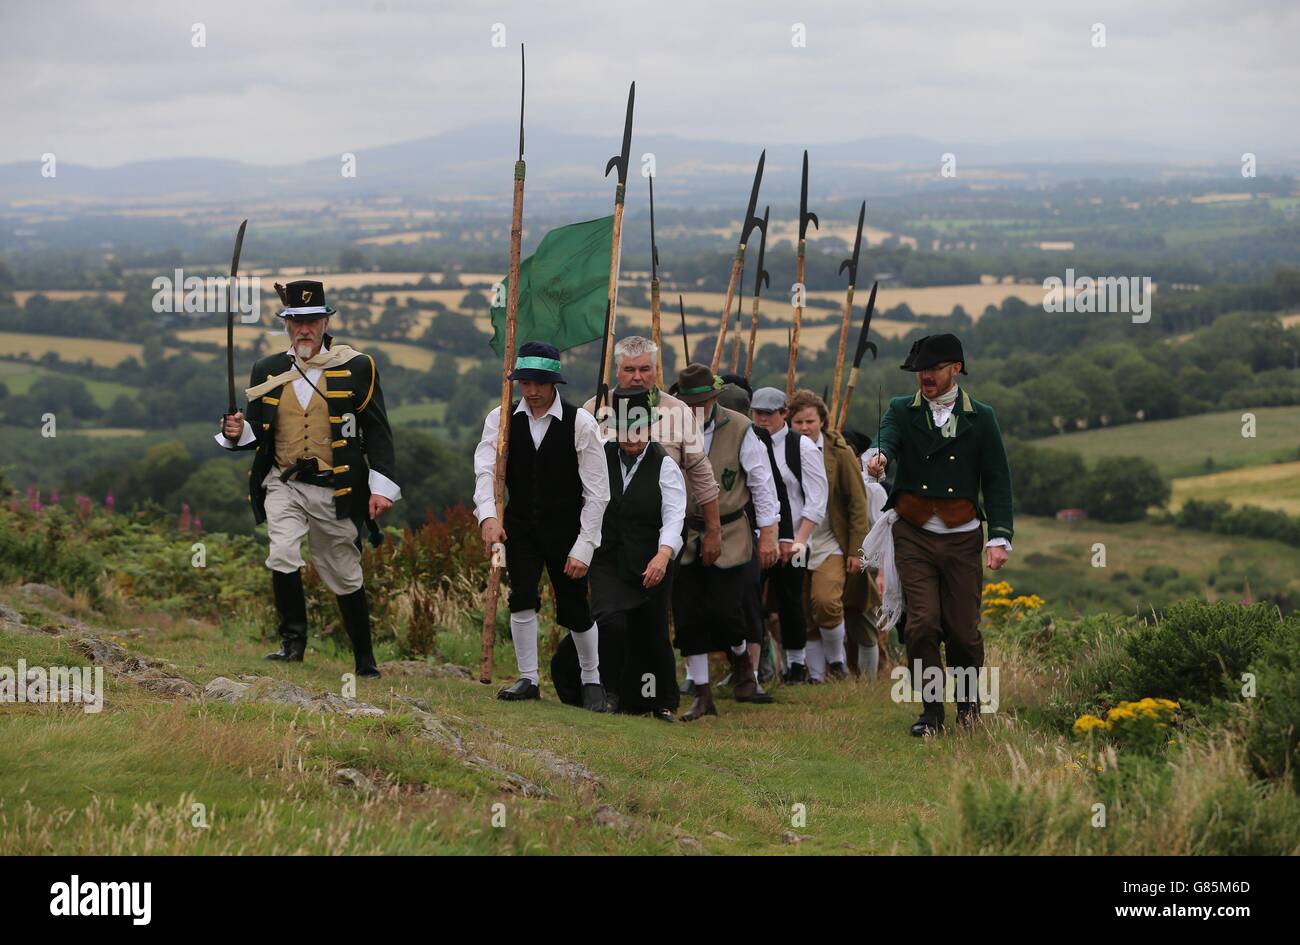 Photo. Irish Rebels arrive for the annual Vinegar Hill Battle, the largest battle re-enactment in Ireland at Enniscorthy, Co Wexford. Stock Photo